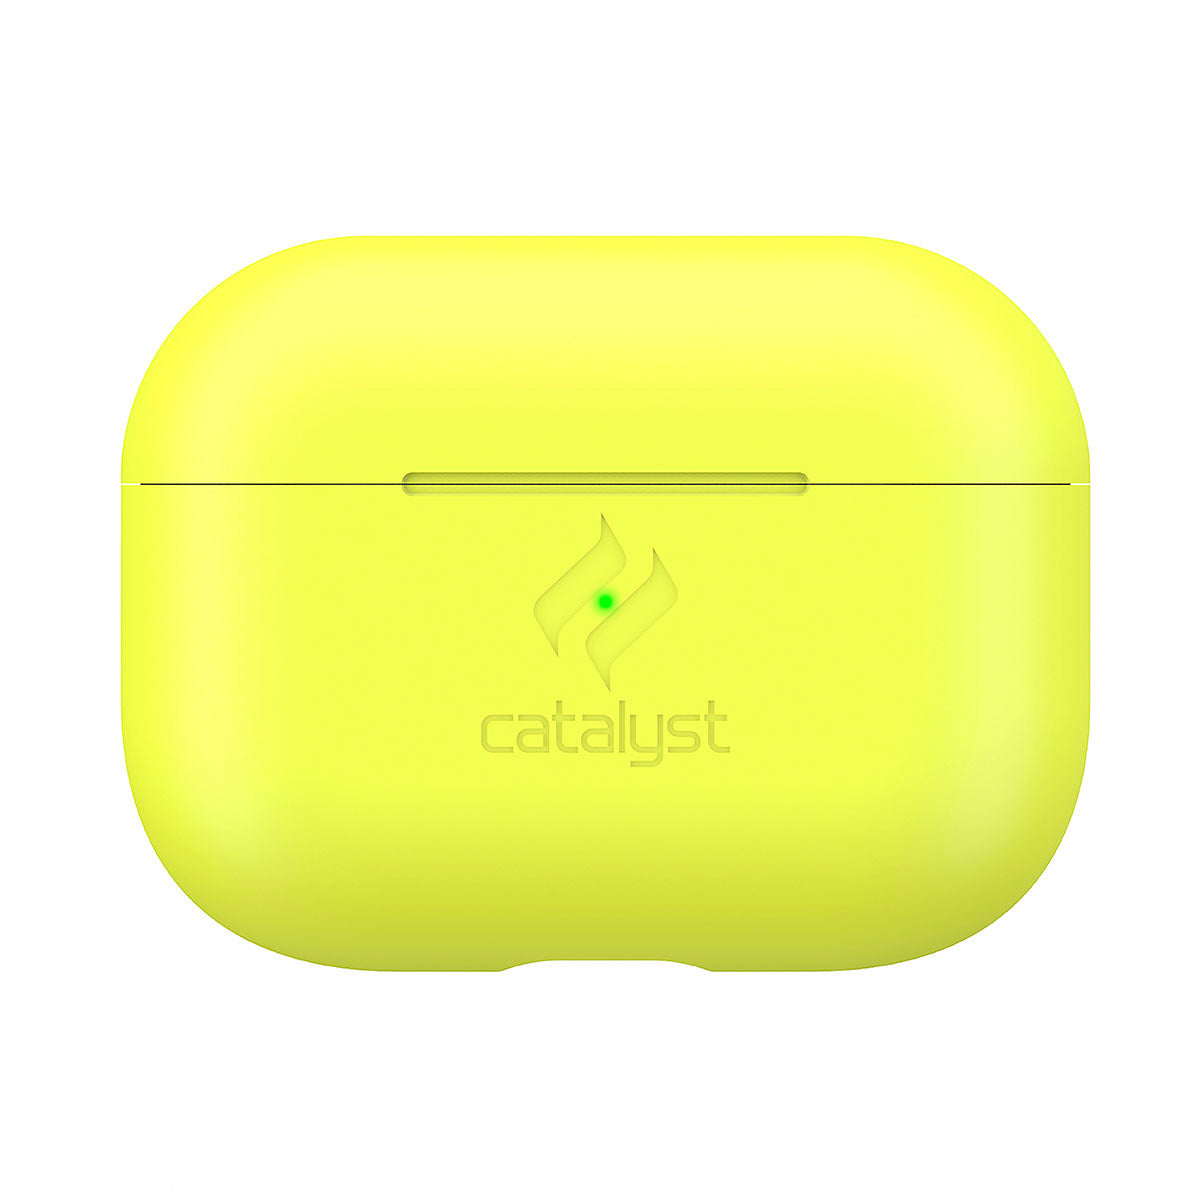 Catalyst airpods pro gen 2/1 slim case showing front view of the case in neon yellow colorway